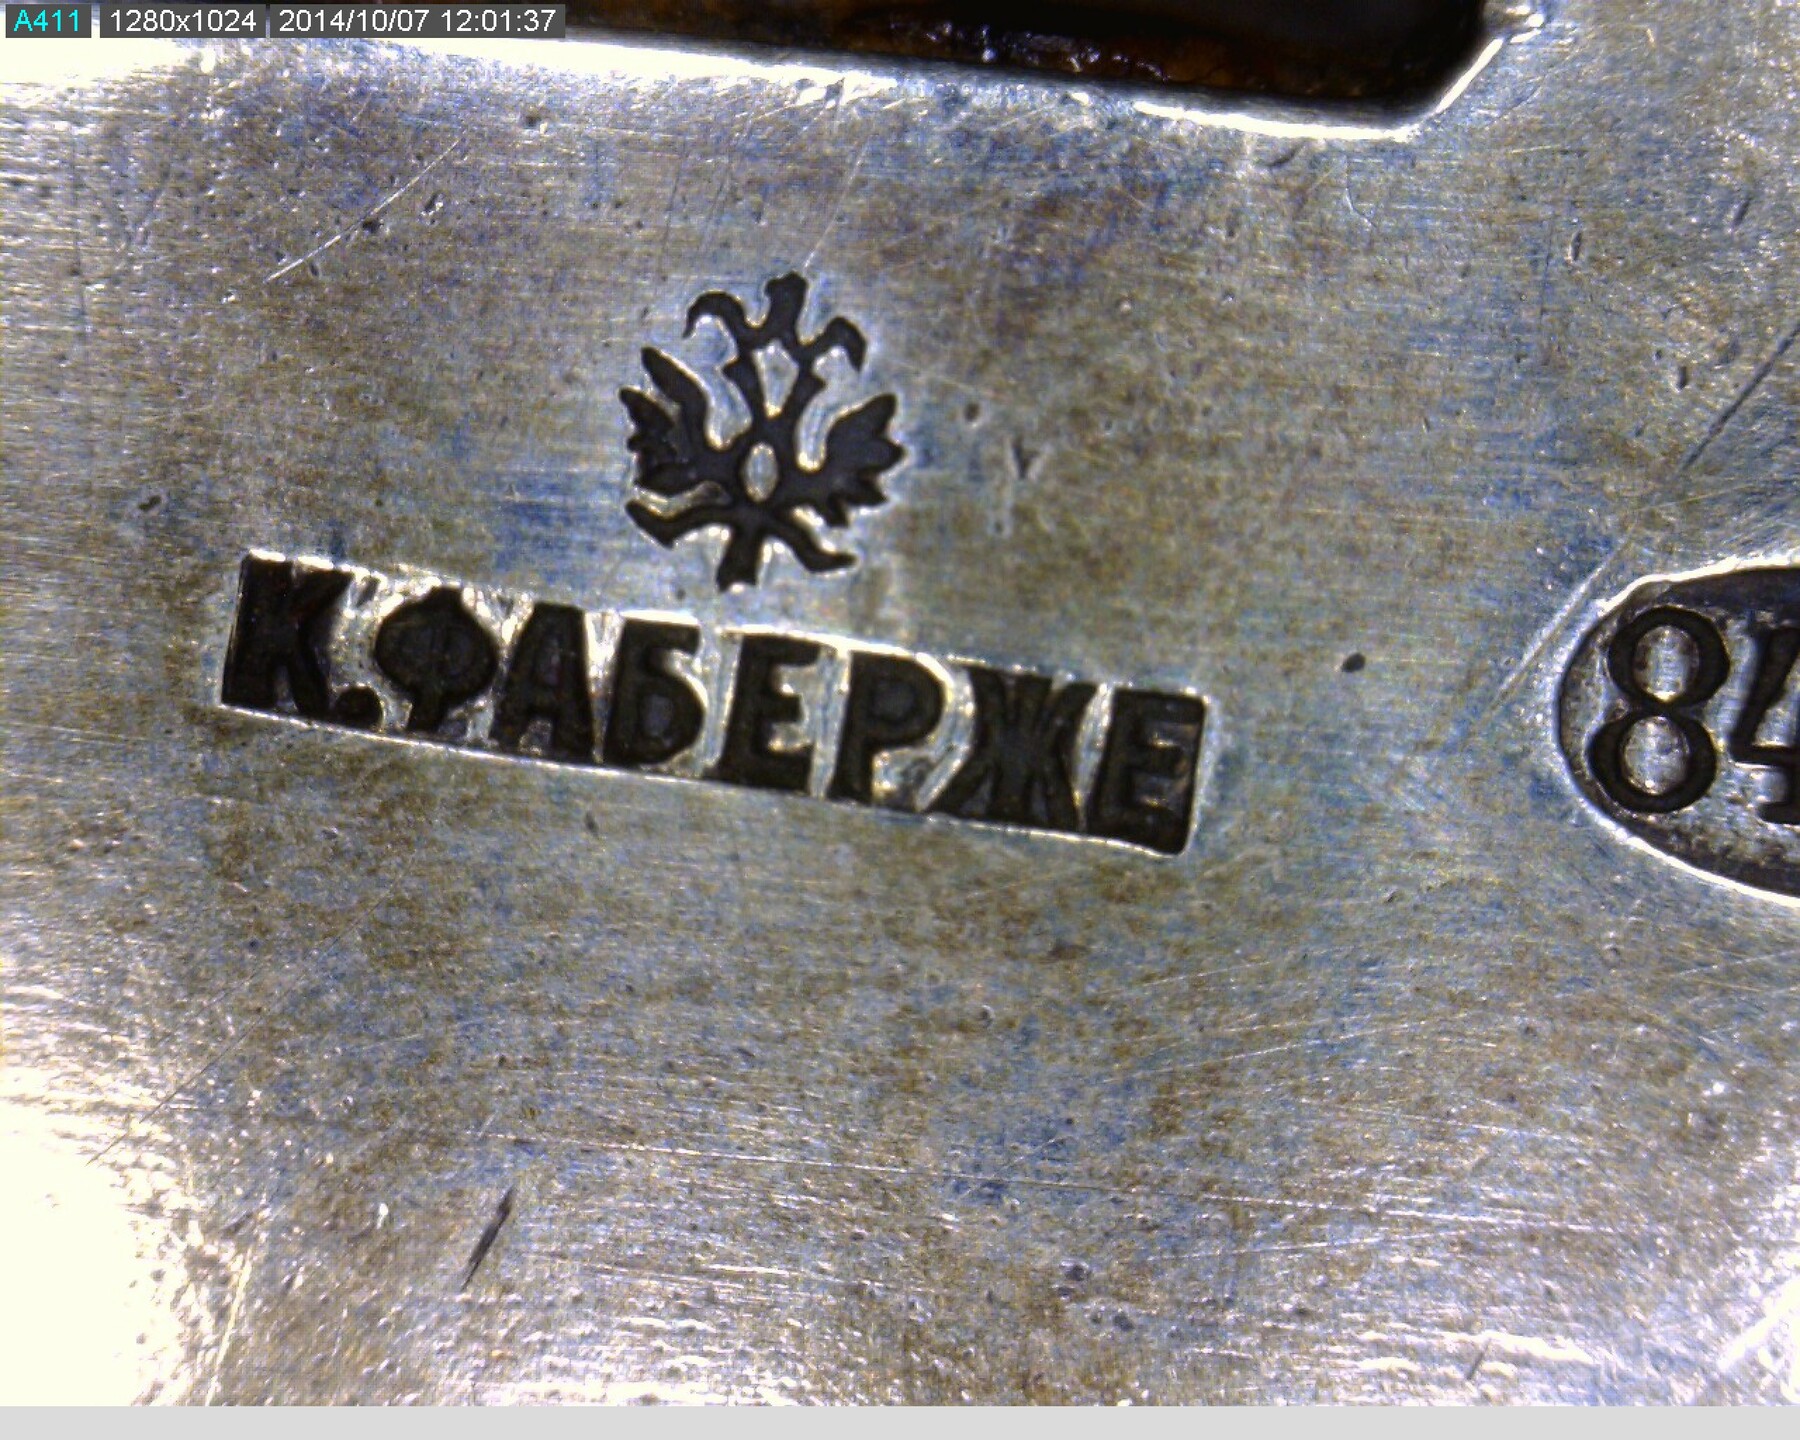 MARK OF FABERGÉ IN CYRILLIC BENEATH THE IMPERIAL WARRANT, MOSCOW, 1899–1908, WITH FRENCH IMPORT MARK